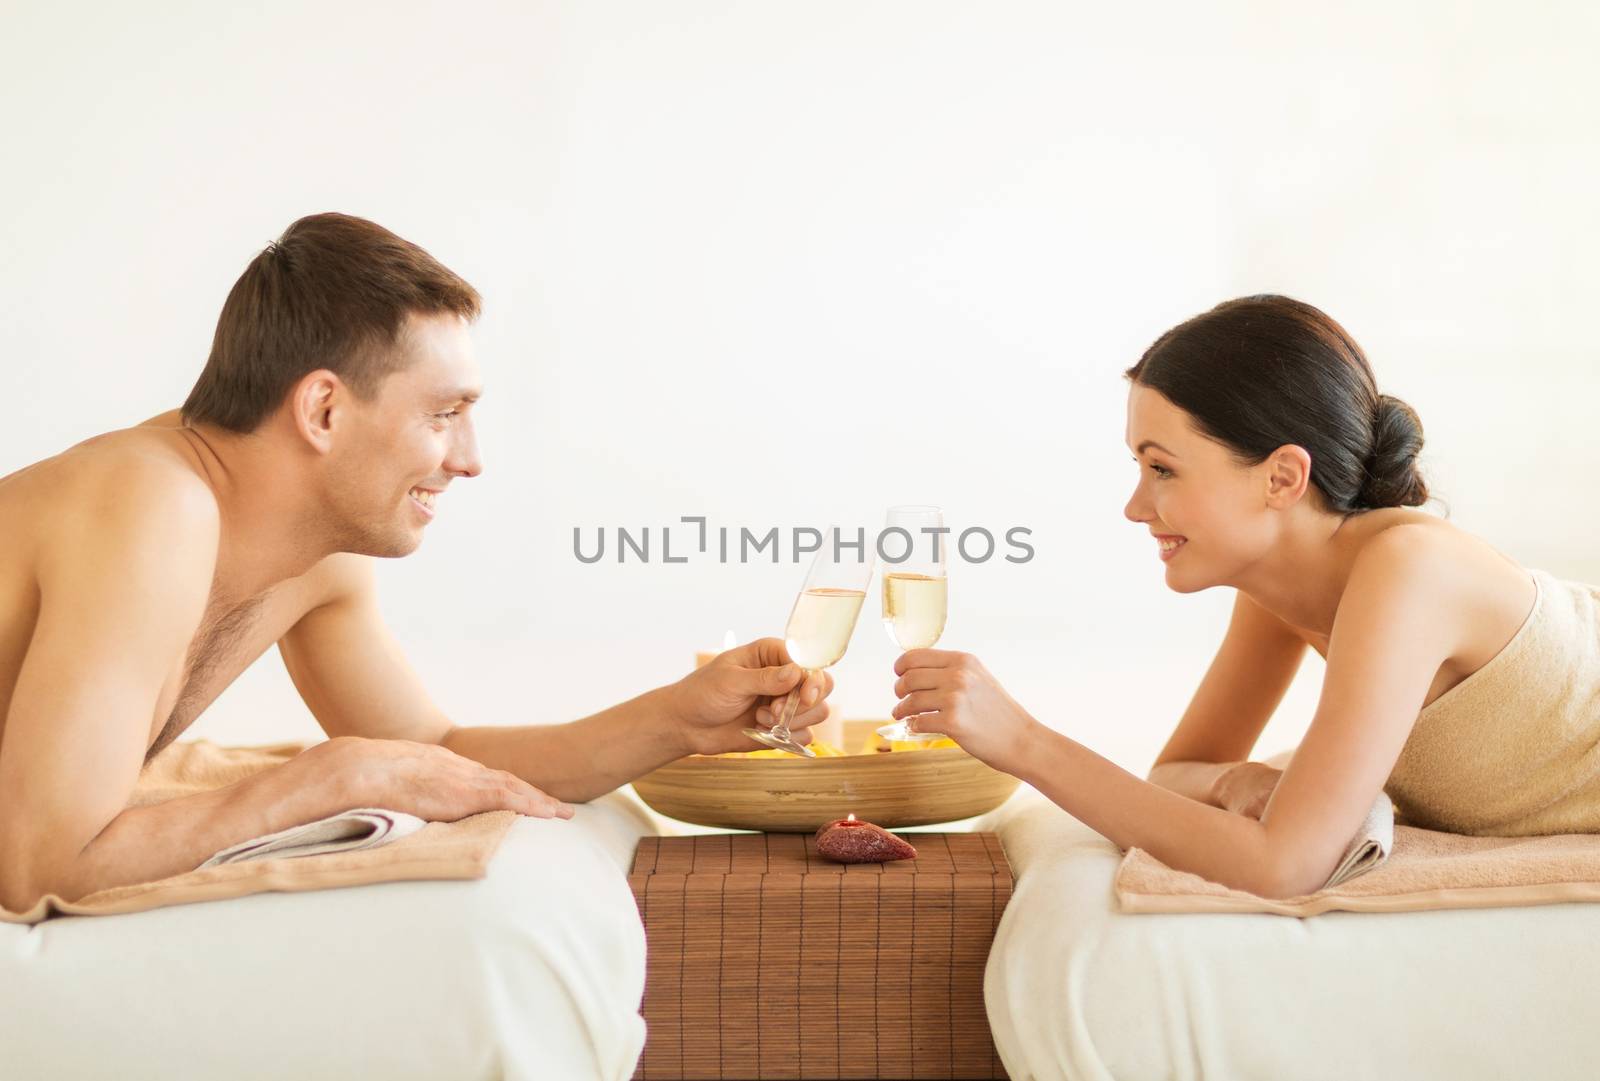 picture of couple in spa salon drinking champagne